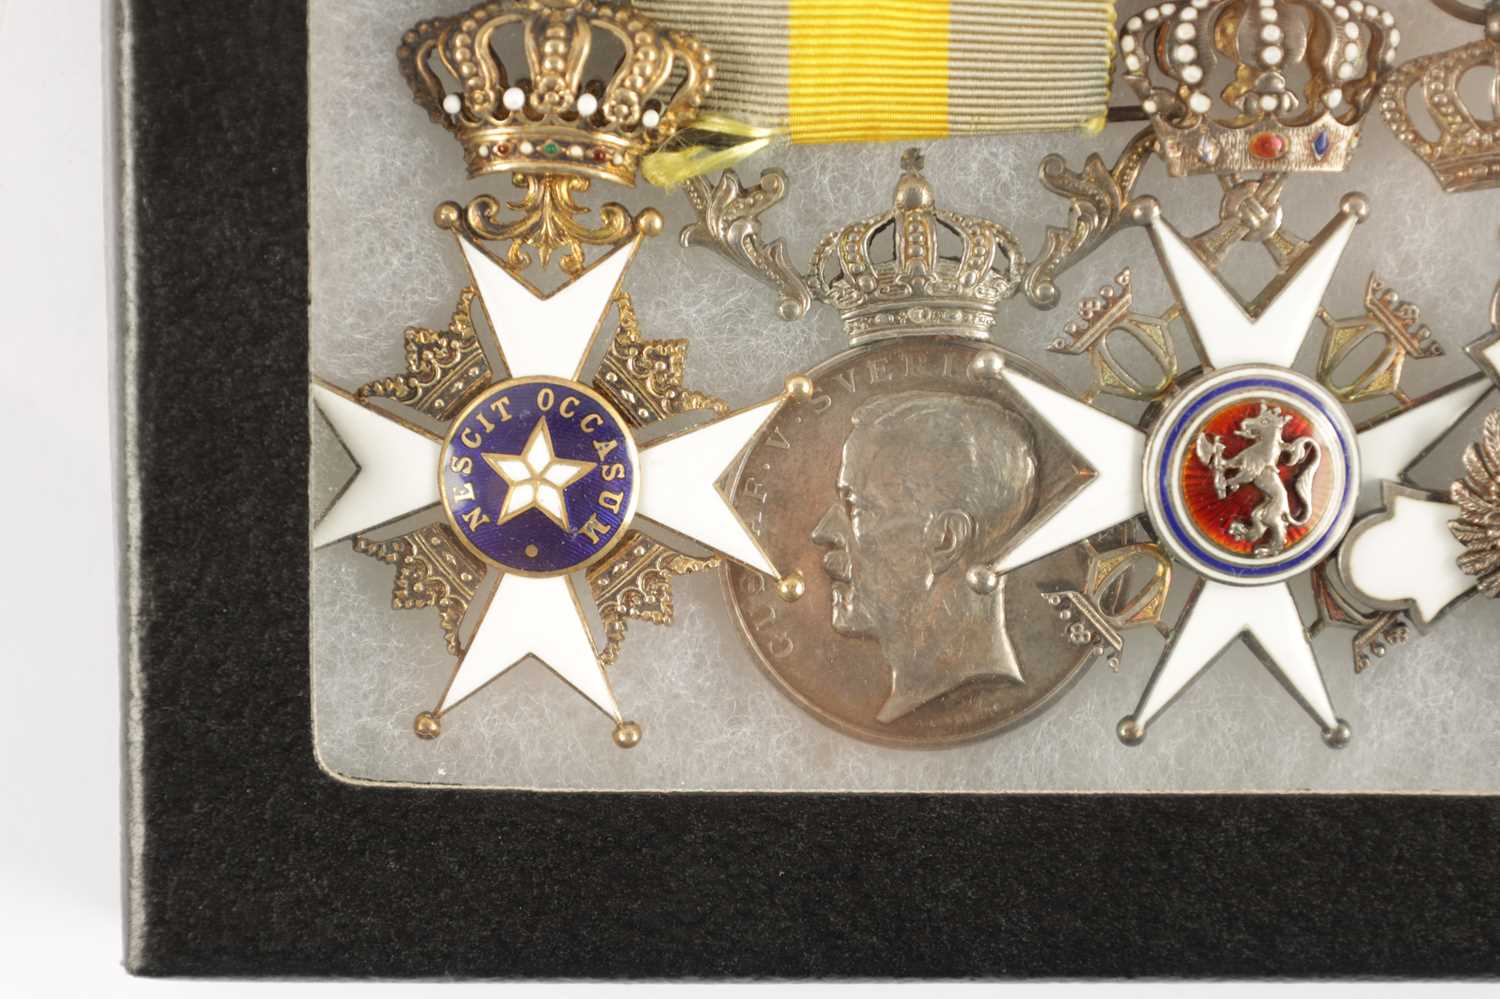 A GROUP OF FOUR COMMANDER’S MEDALS - Image 2 of 3